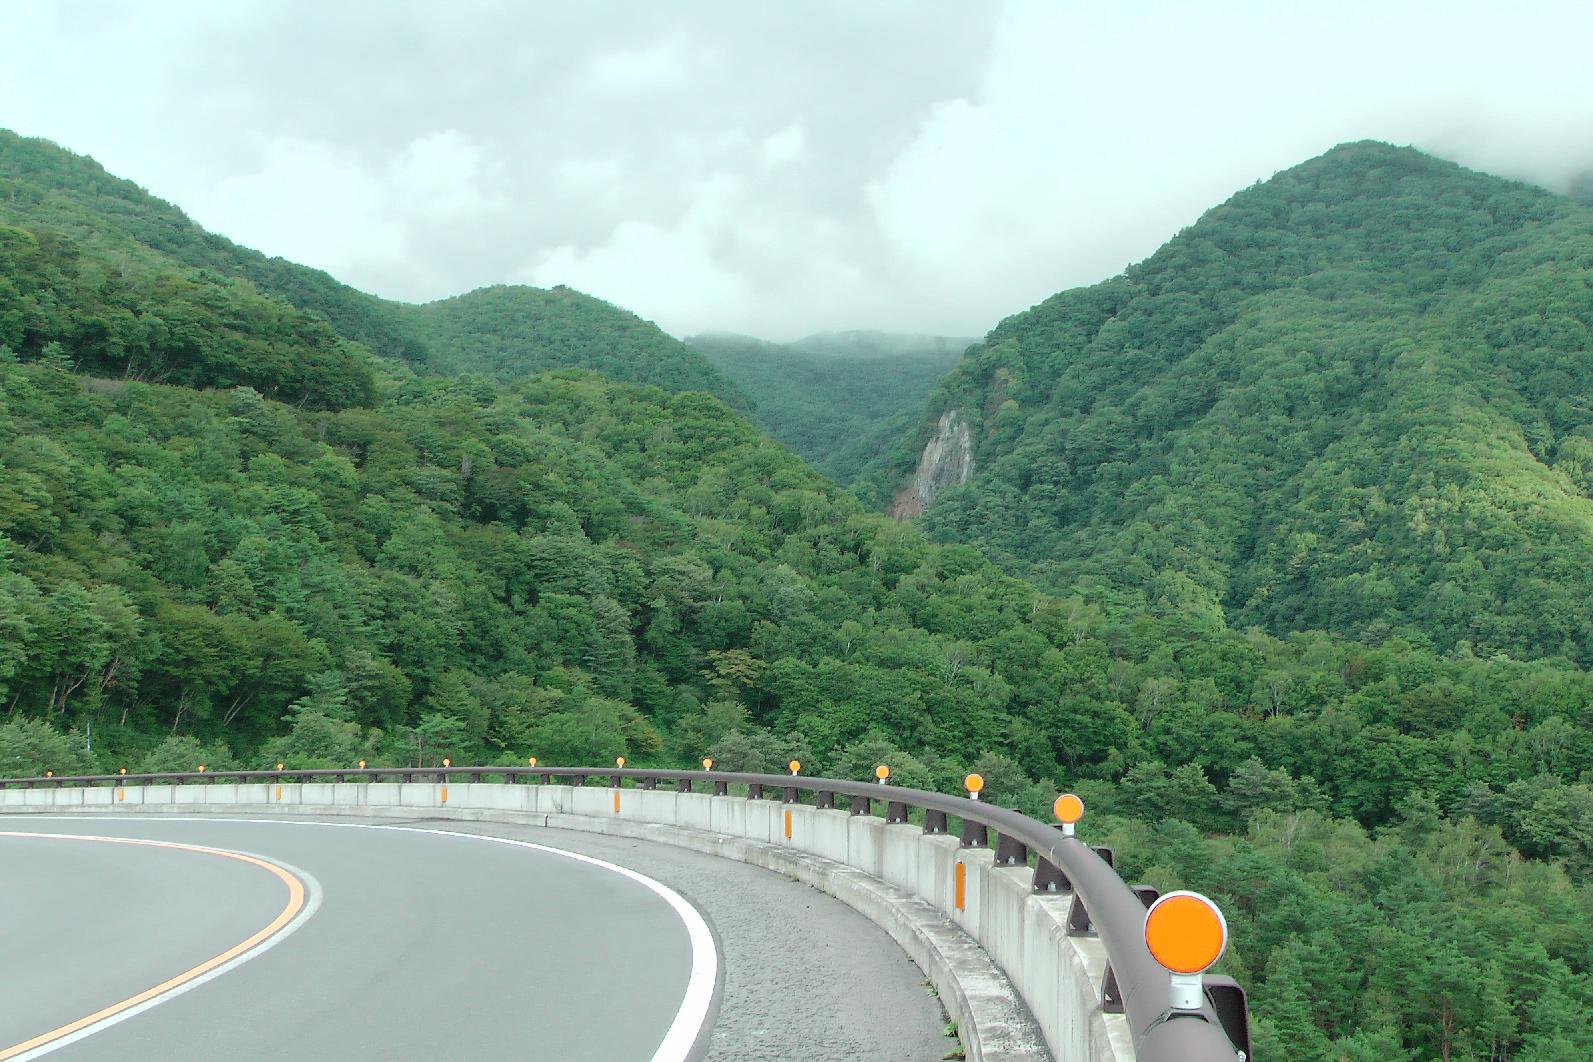 Route 292, Japan's highest national route.